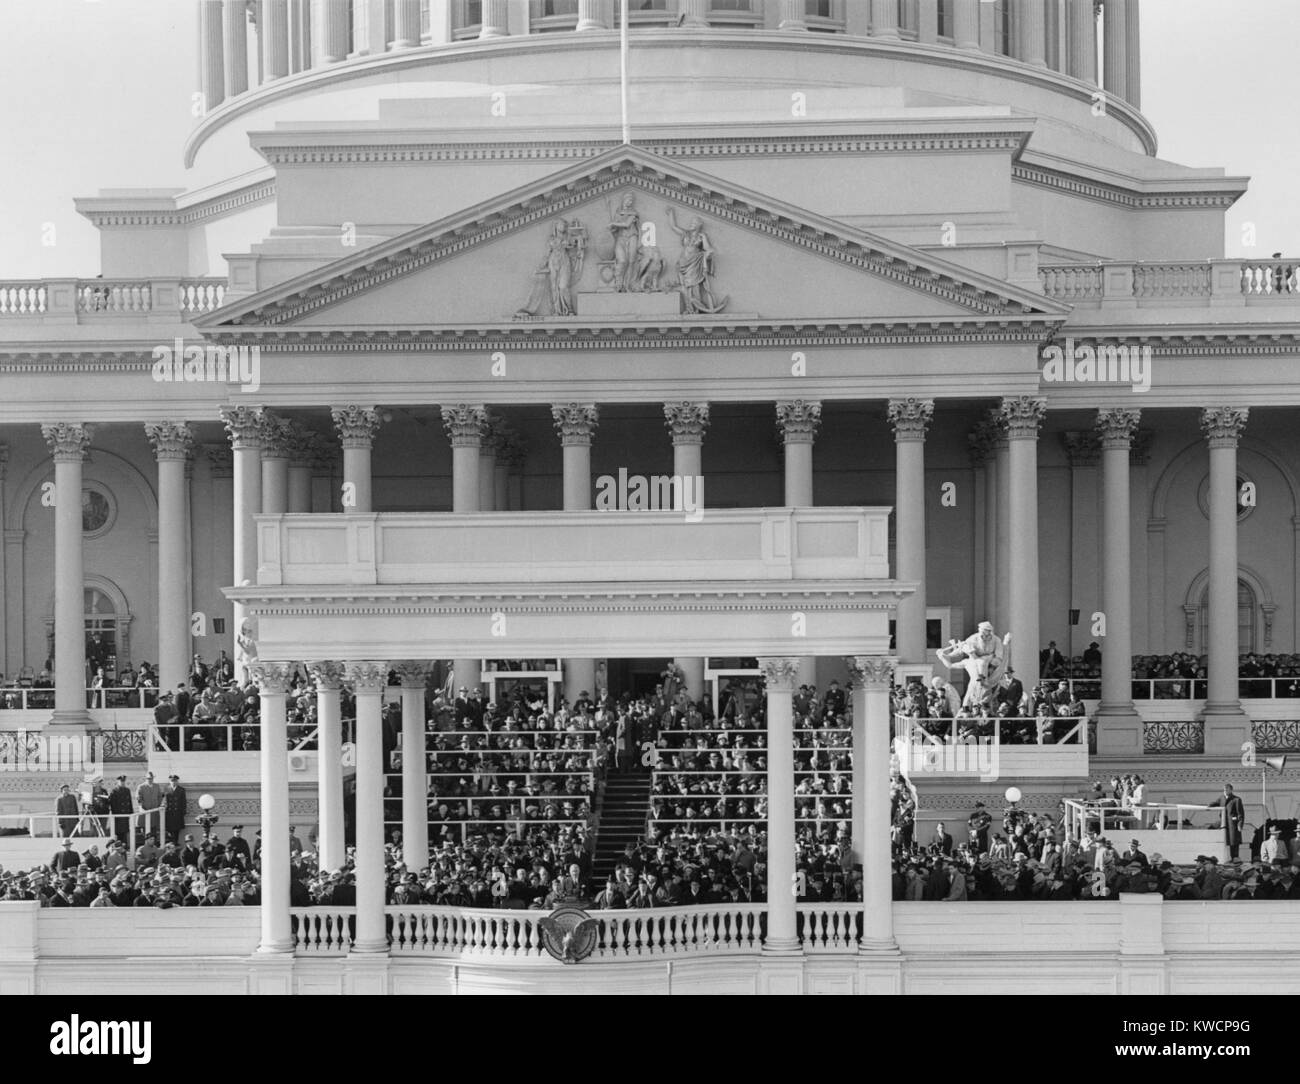 View of the President Harry Truman delivering his inaugural address. Jan. 20, 1949. - (BSLOC 2014 15 58) Stock Photo